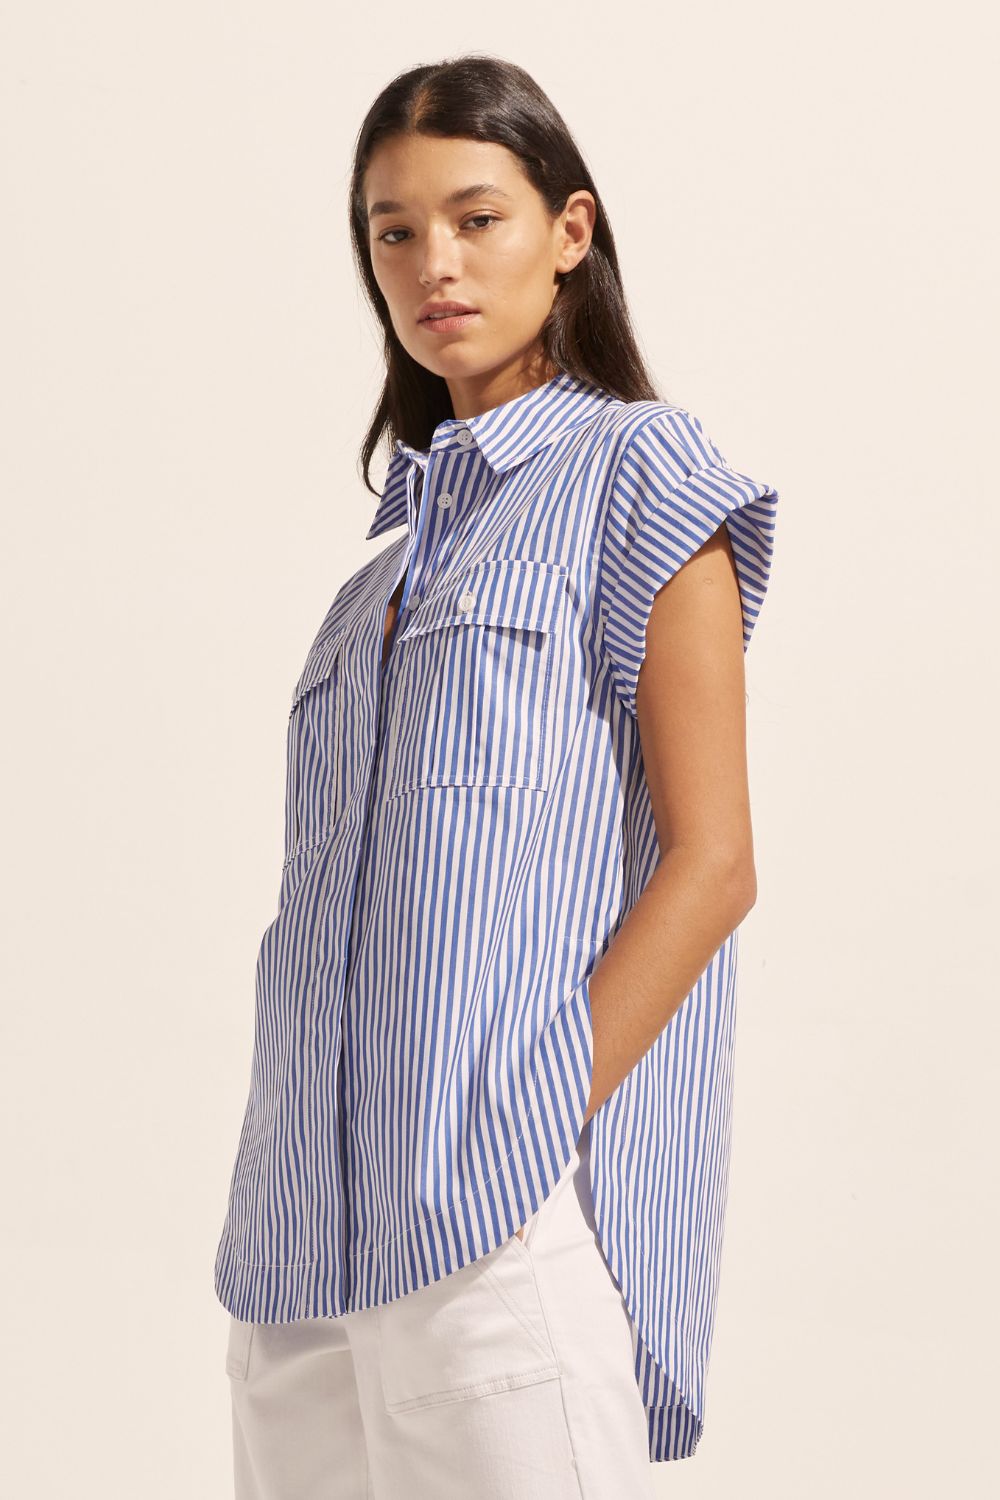 blue and white stripe, cuffed short sleeve, high-low hemline, covered placket, oversized patch pockets, shirt, top, side image